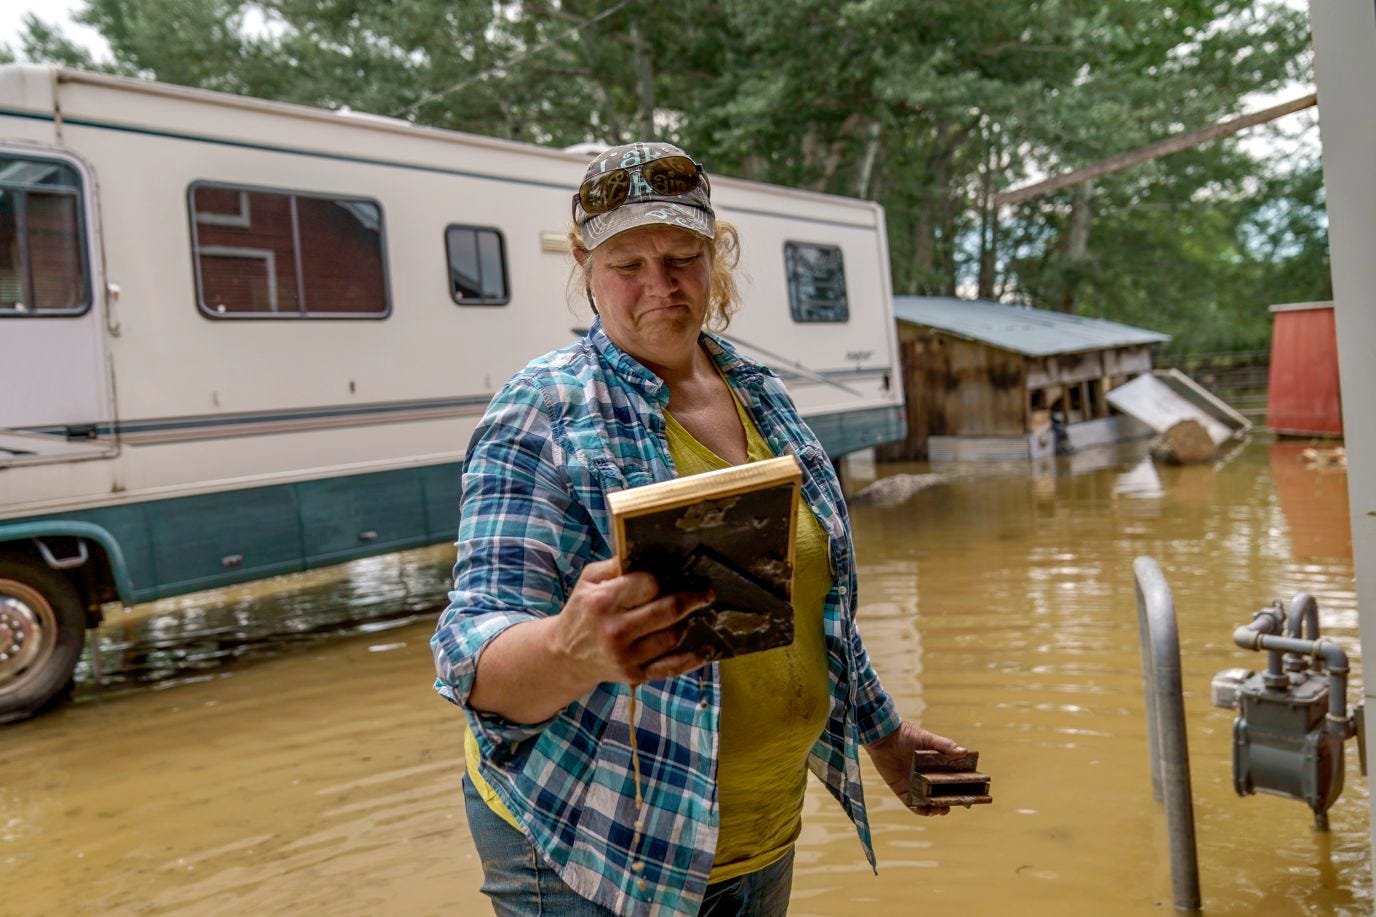 A woman stares sadly into a photograph as she stands in floodwaters.